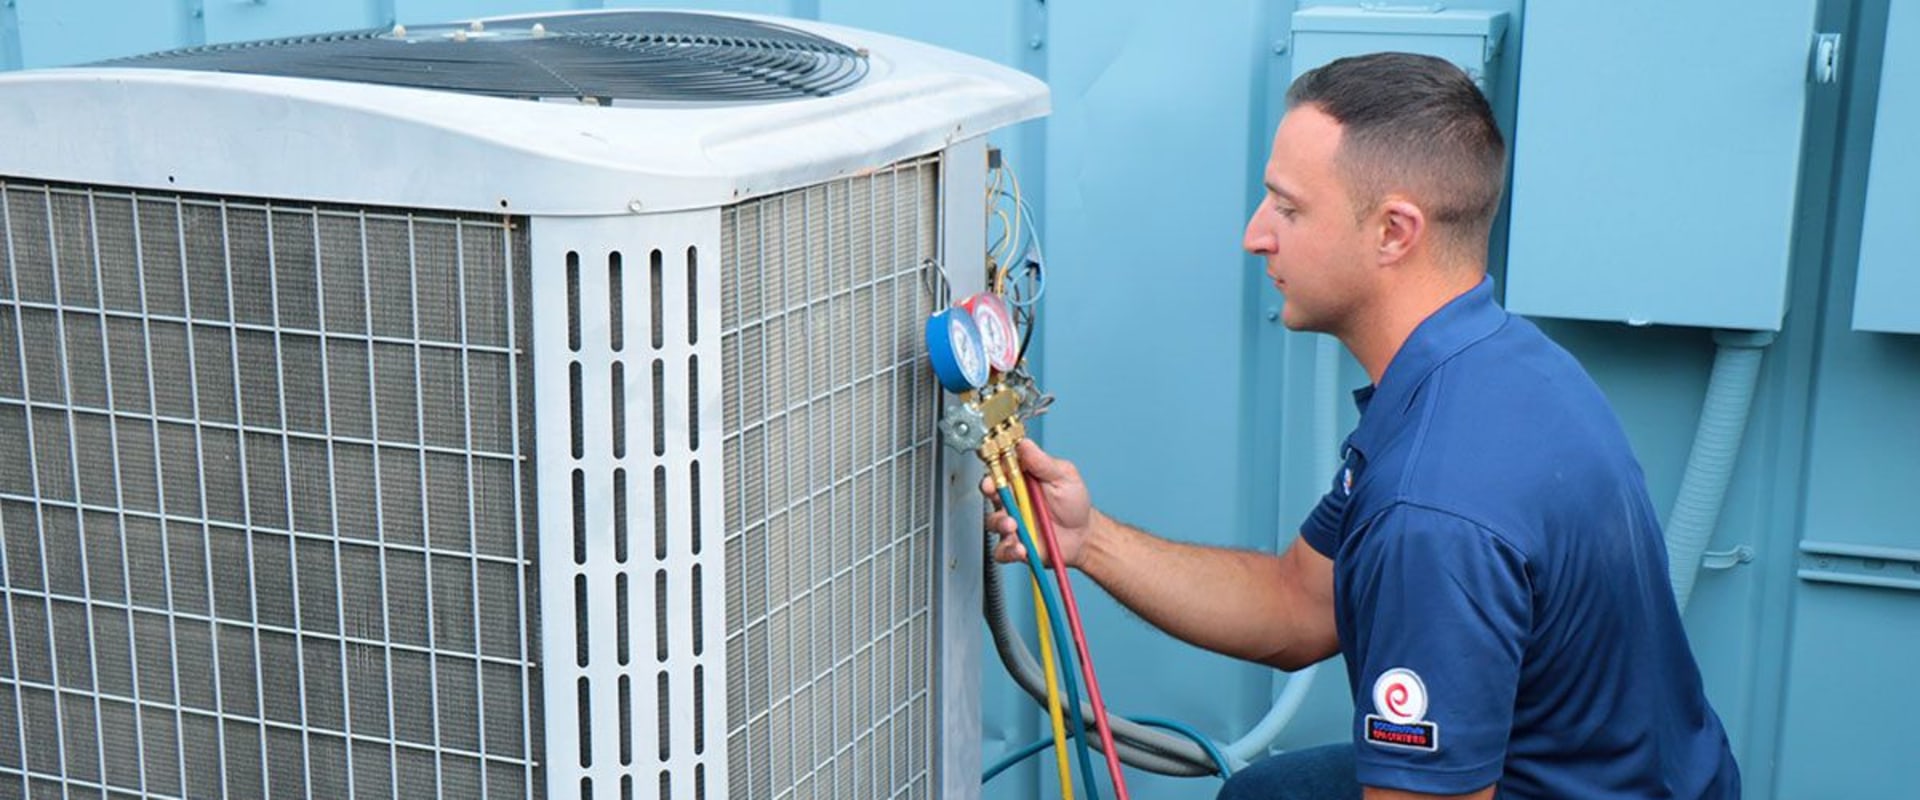 Reliable HVAC Maintenance Services in Broward County, FL